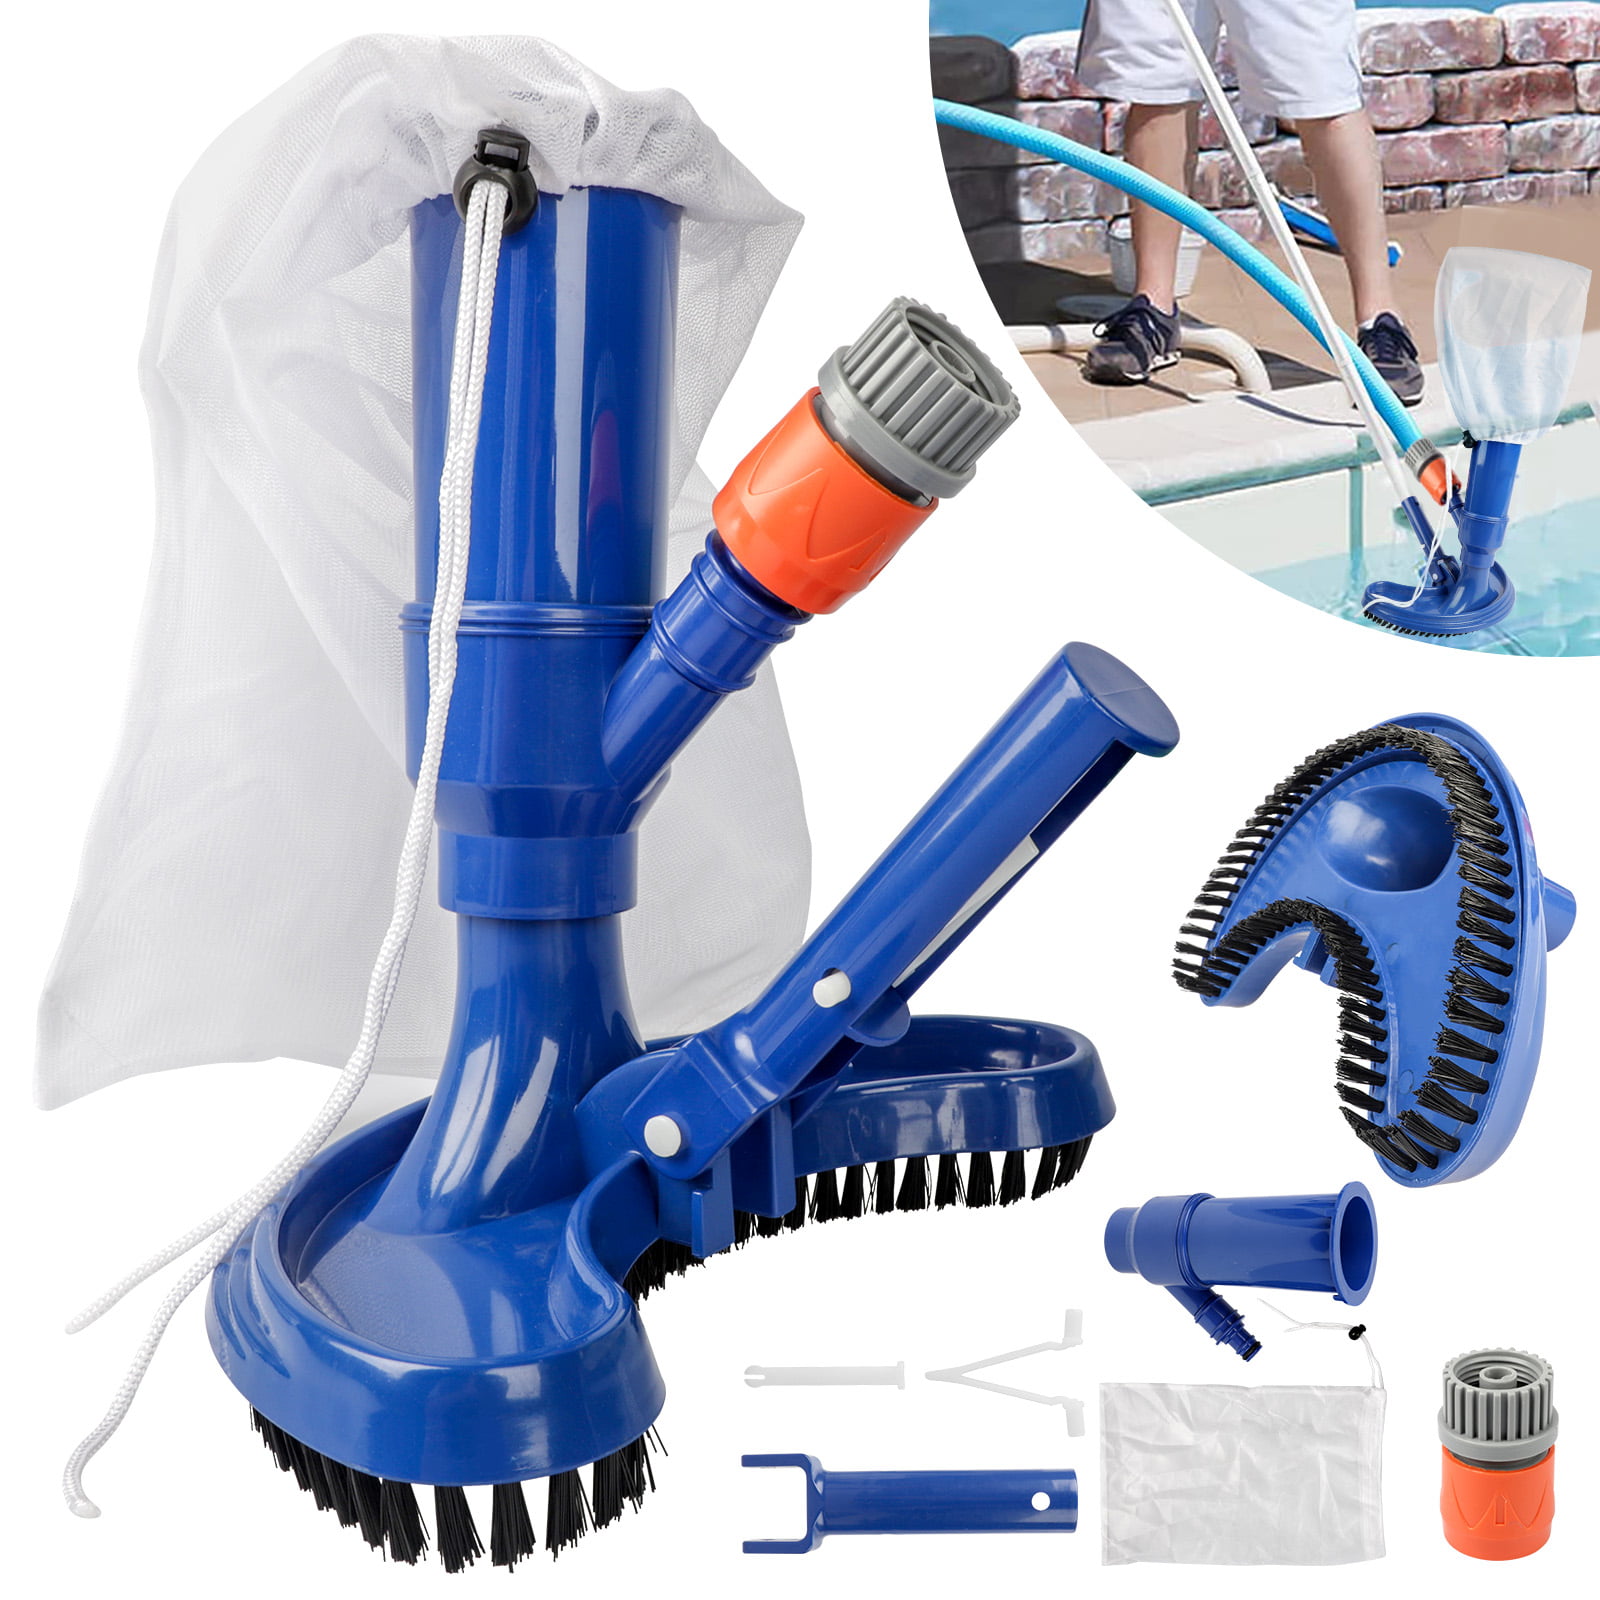 Swimming Pool Vacuum Cleaner Spa Pond Tub Electrical Water Cleaning Tool Kit UK 